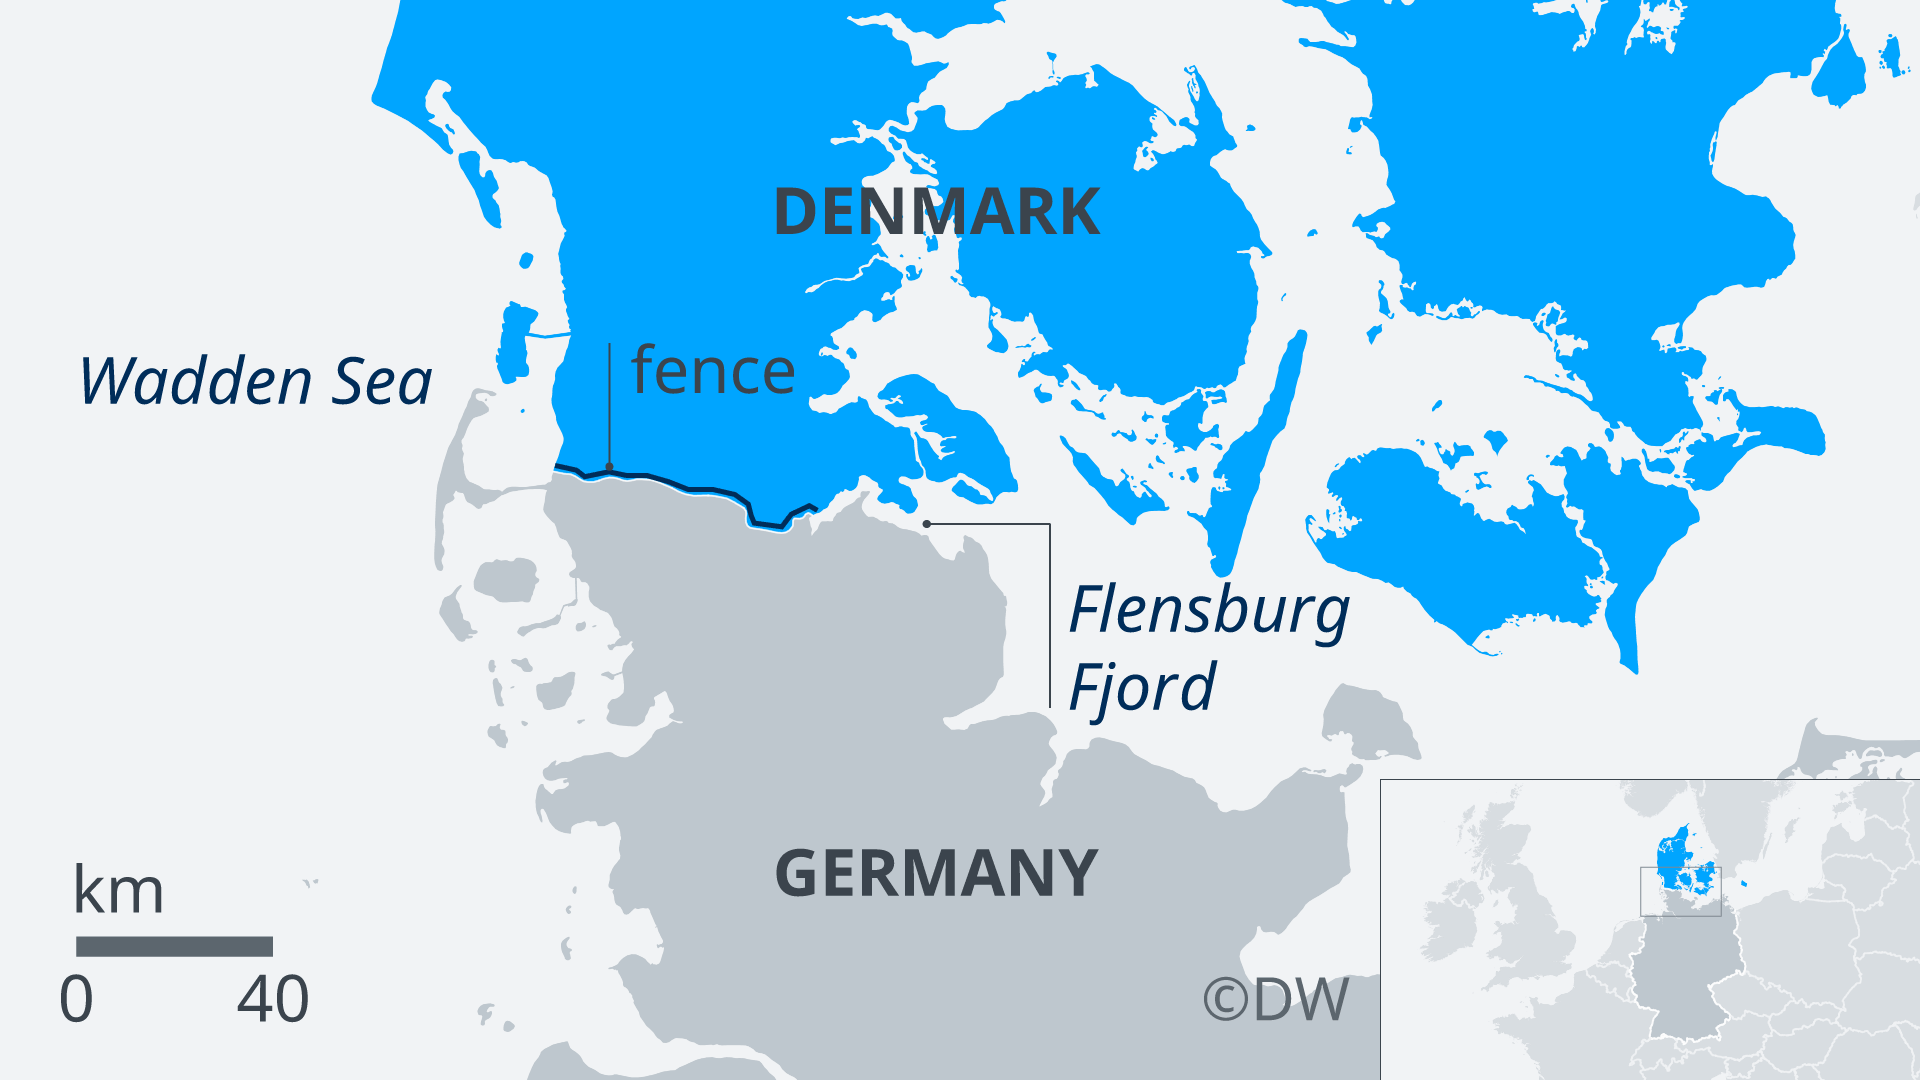 map of germany and denmark Denmark Completes Contentious Fence Along German Border News Dw 02 12 2019 map of germany and denmark